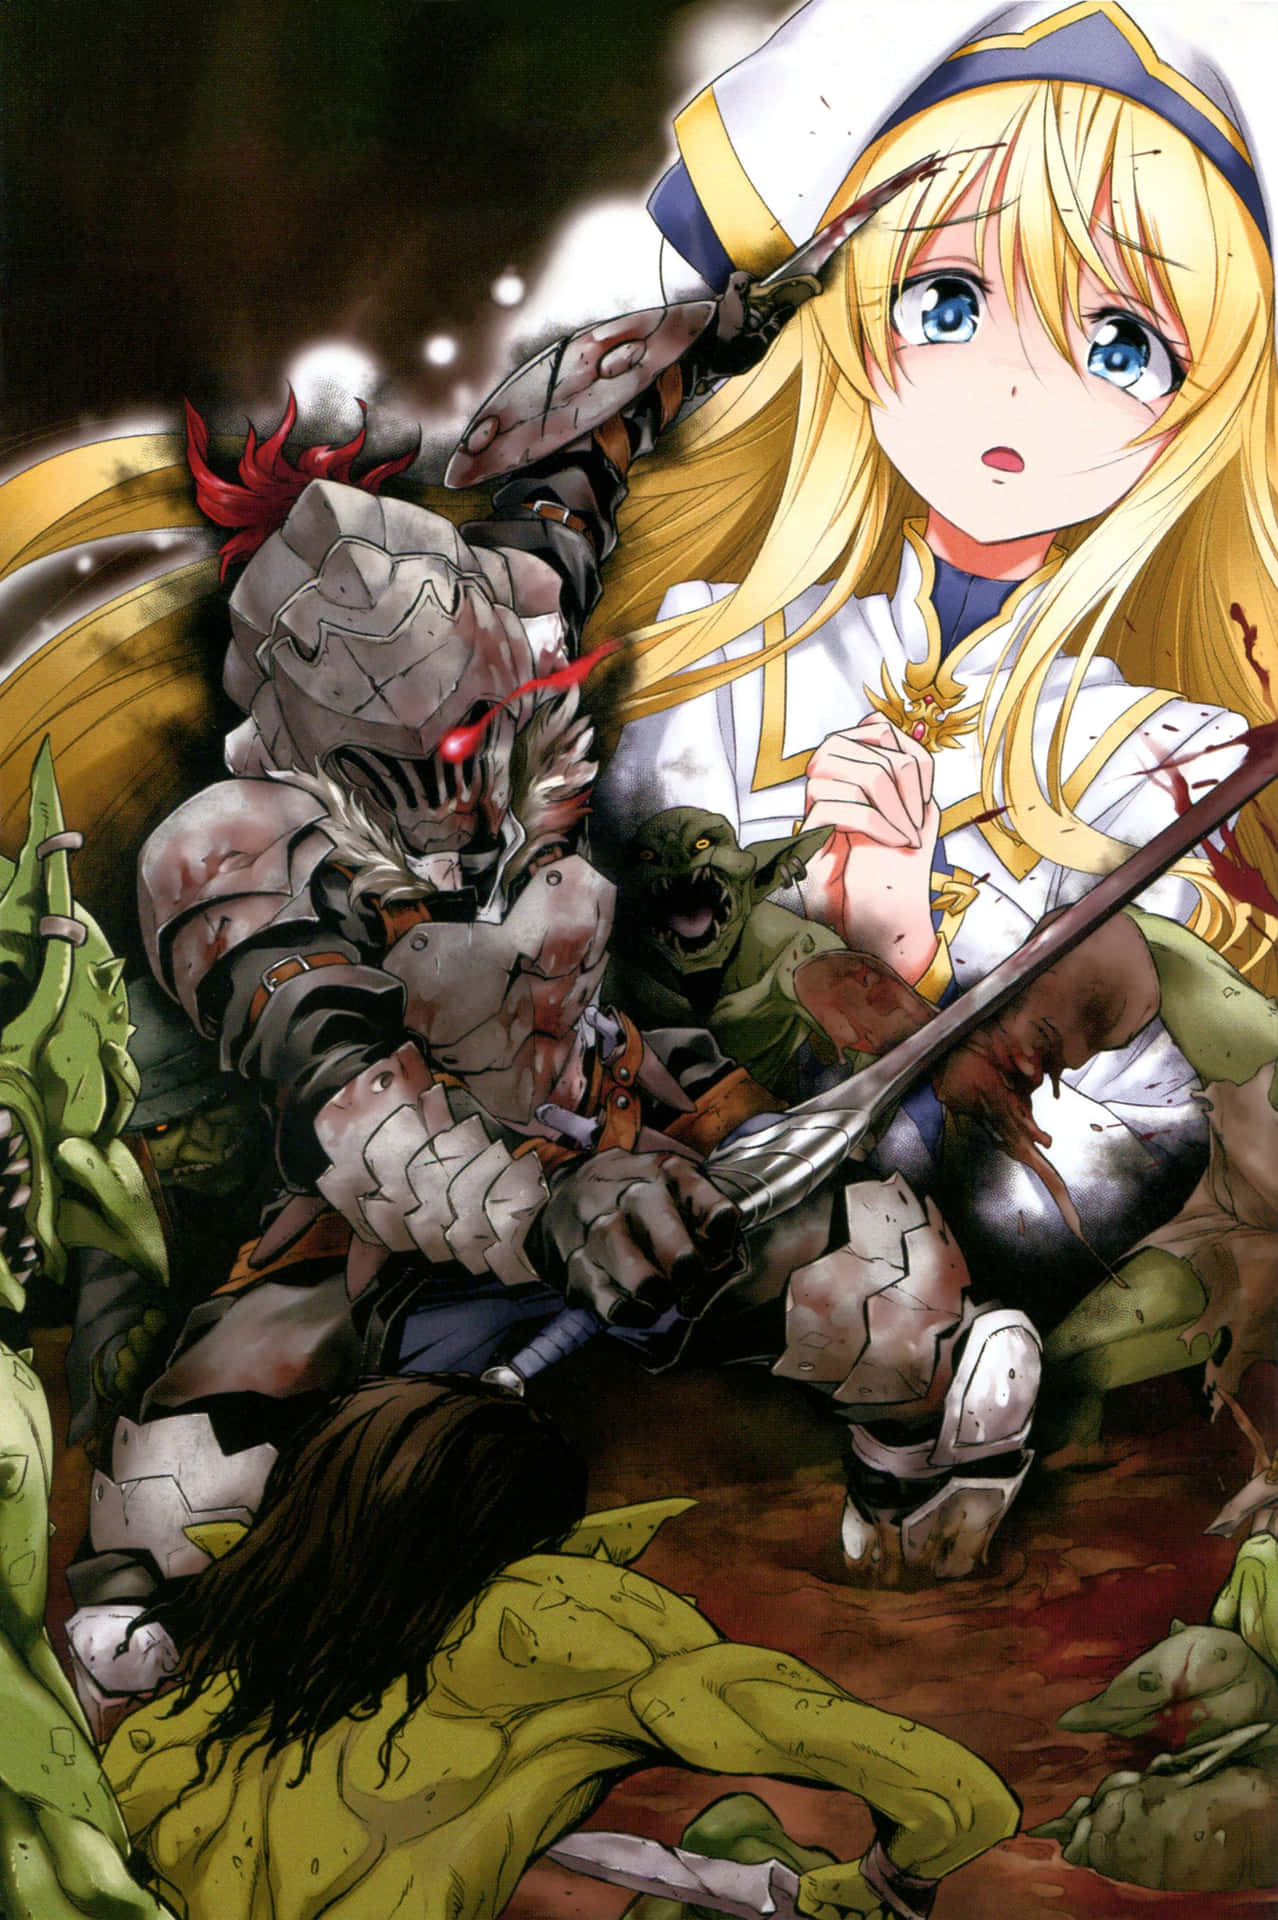 Goblin Slayer in action with his iconic armor and sword